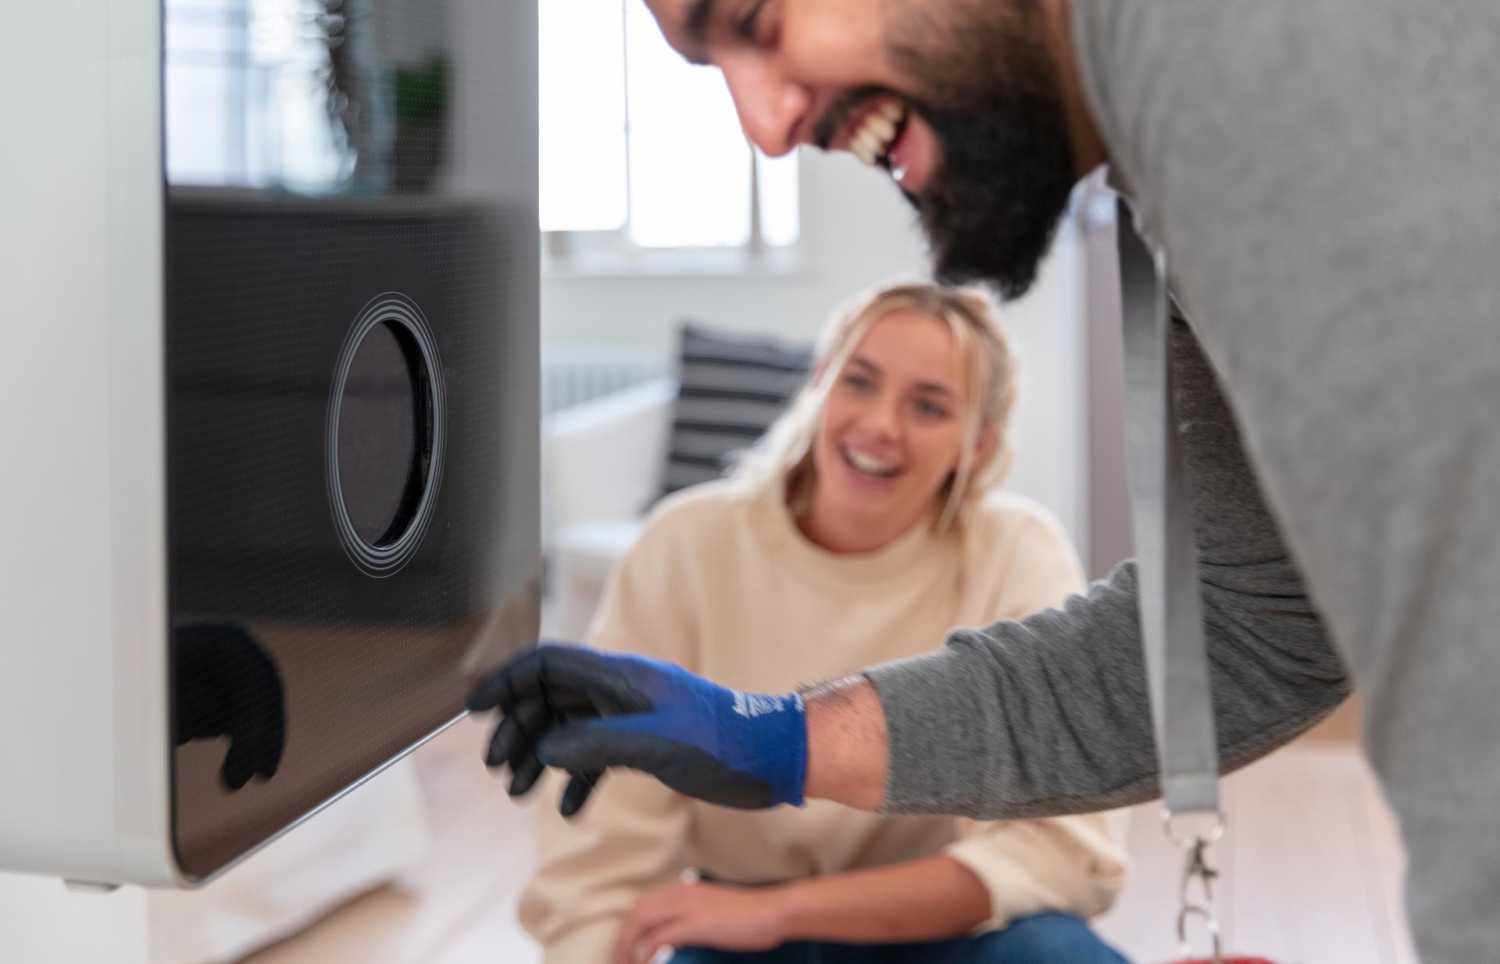 A man laughing while installing a new boiler as a woman laughs in the background